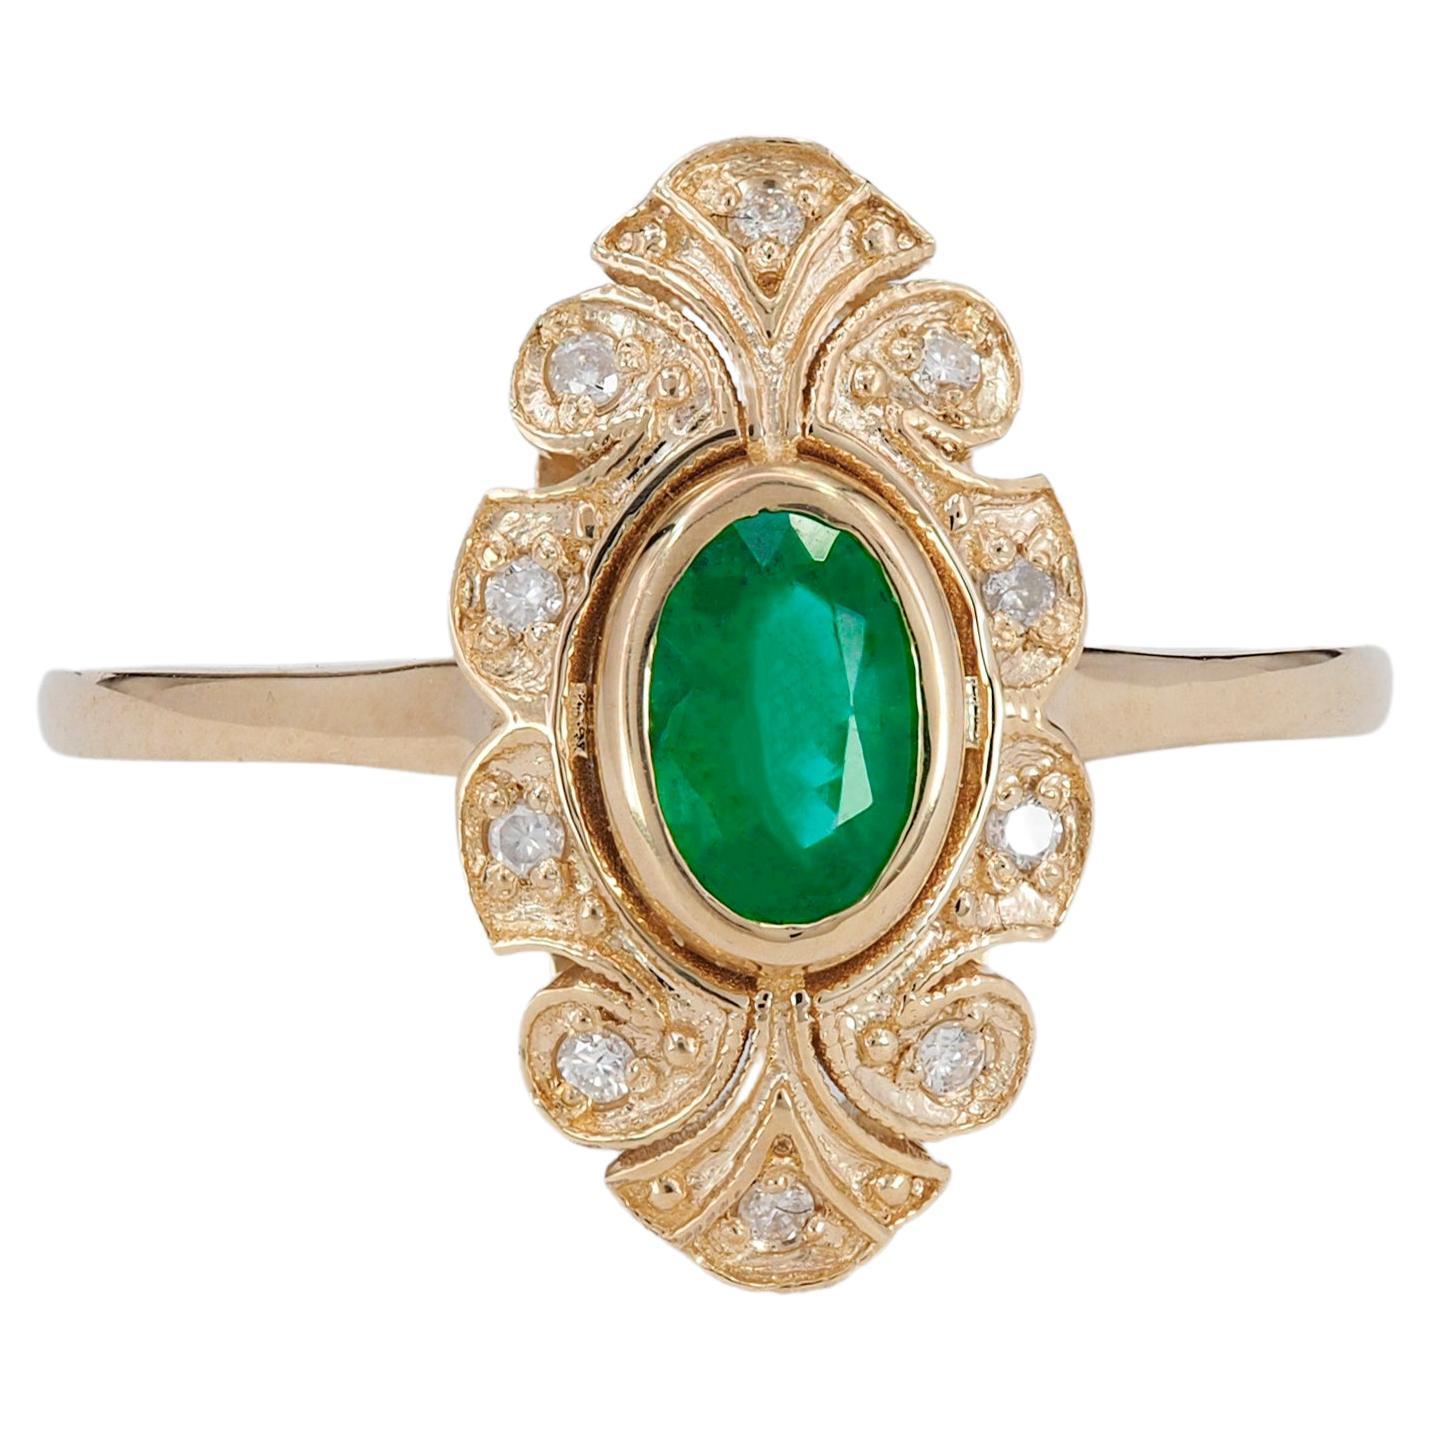 14k Gold Ring with Oval Emerald and Diamonds, Vintage Inspired Ring